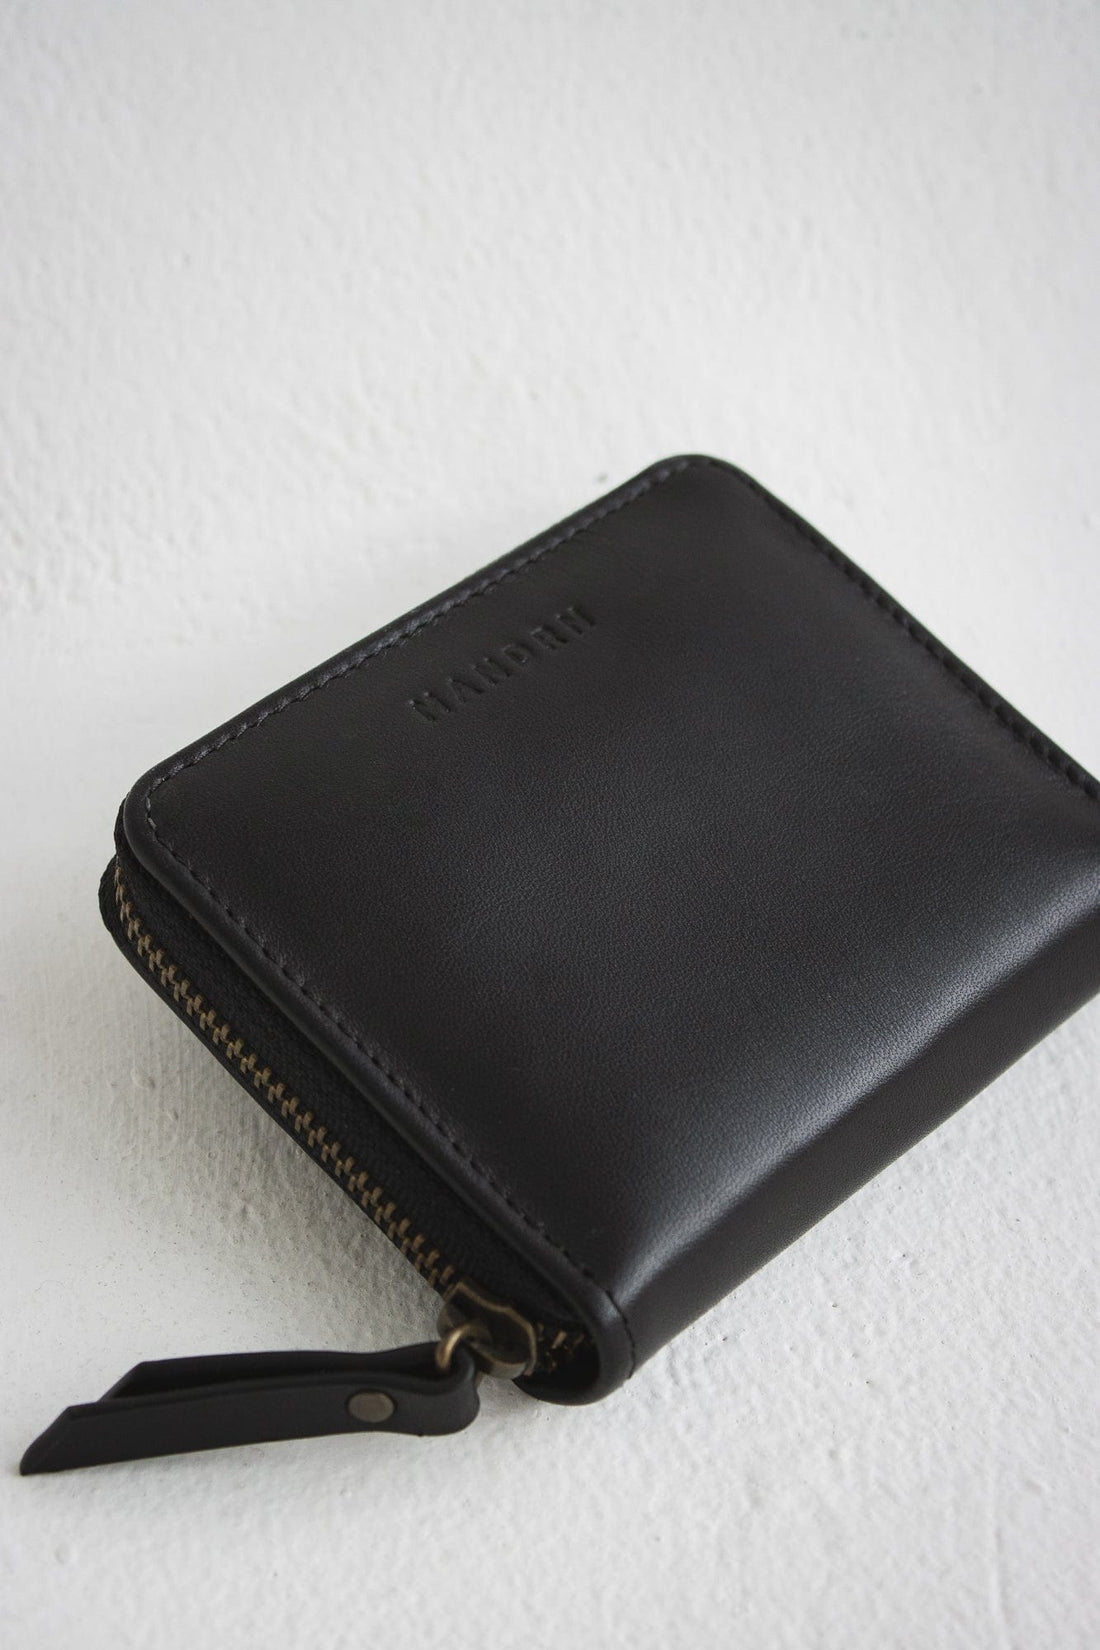 MANDRN | The Quin - Black Zipped Leather Wallet